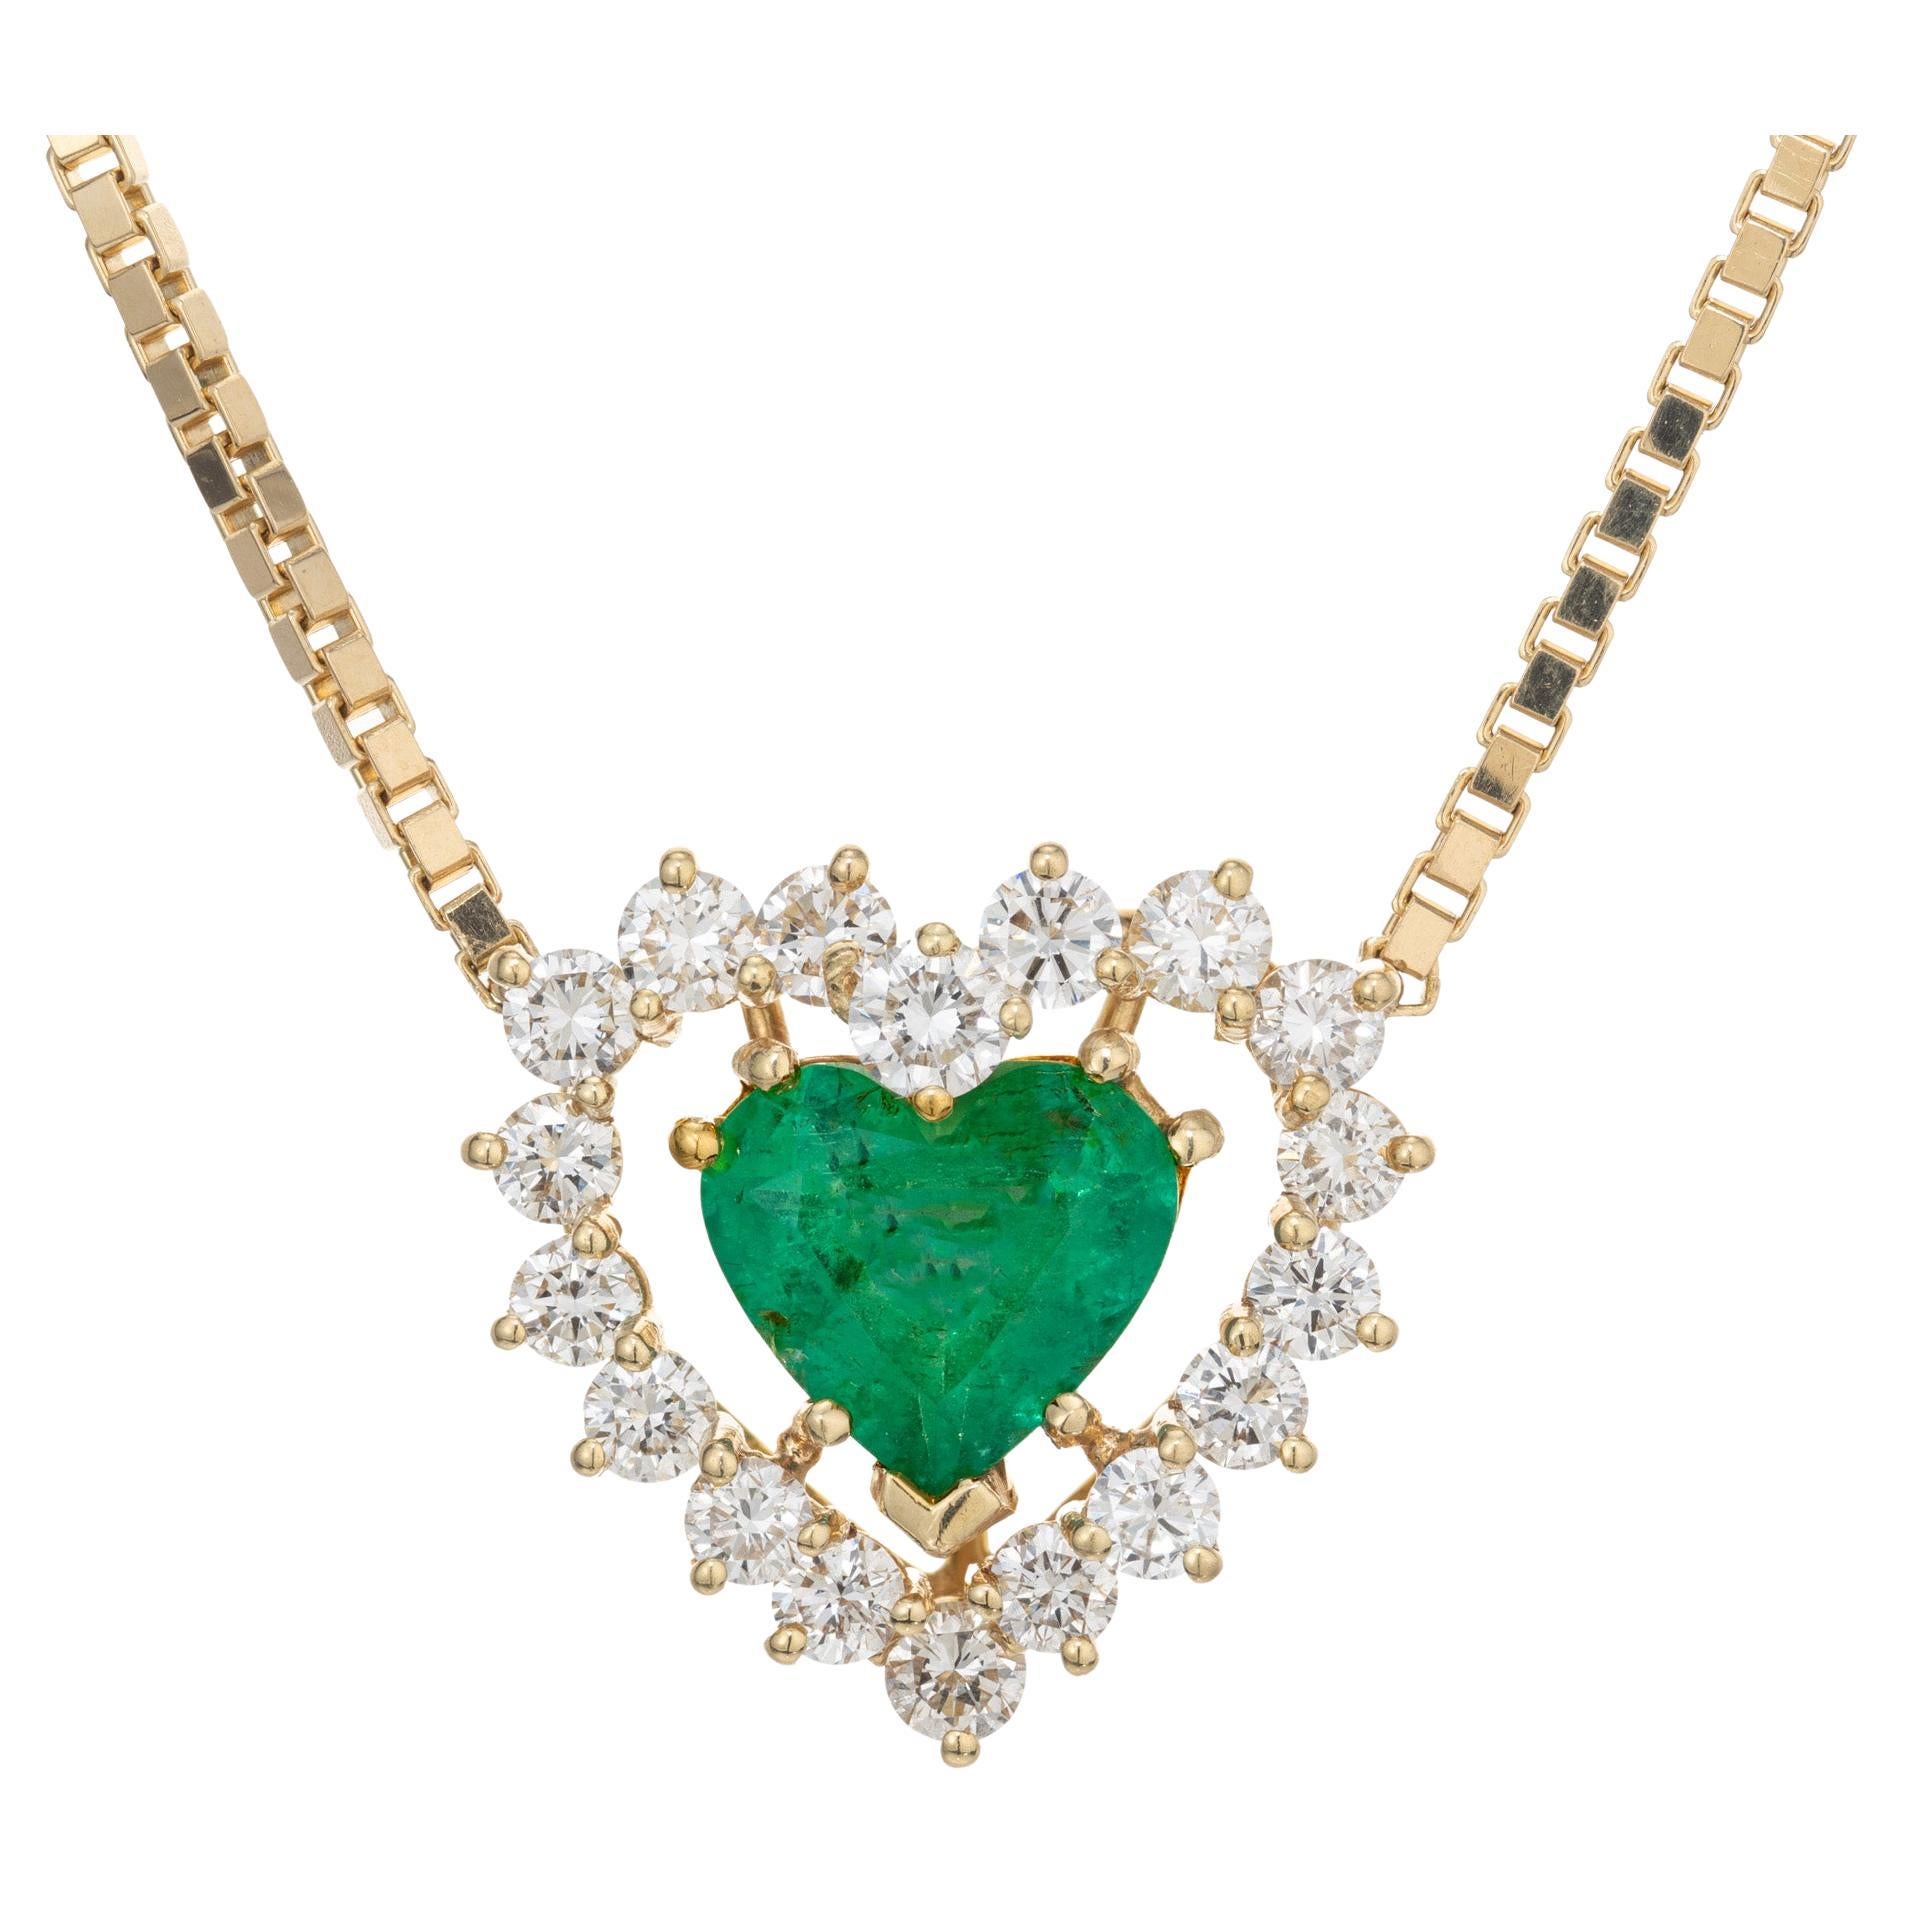 Peter Suchy GIA Certified 1.81 Carat Heart Emerald Diamond Gold Pendant Necklace For Sale